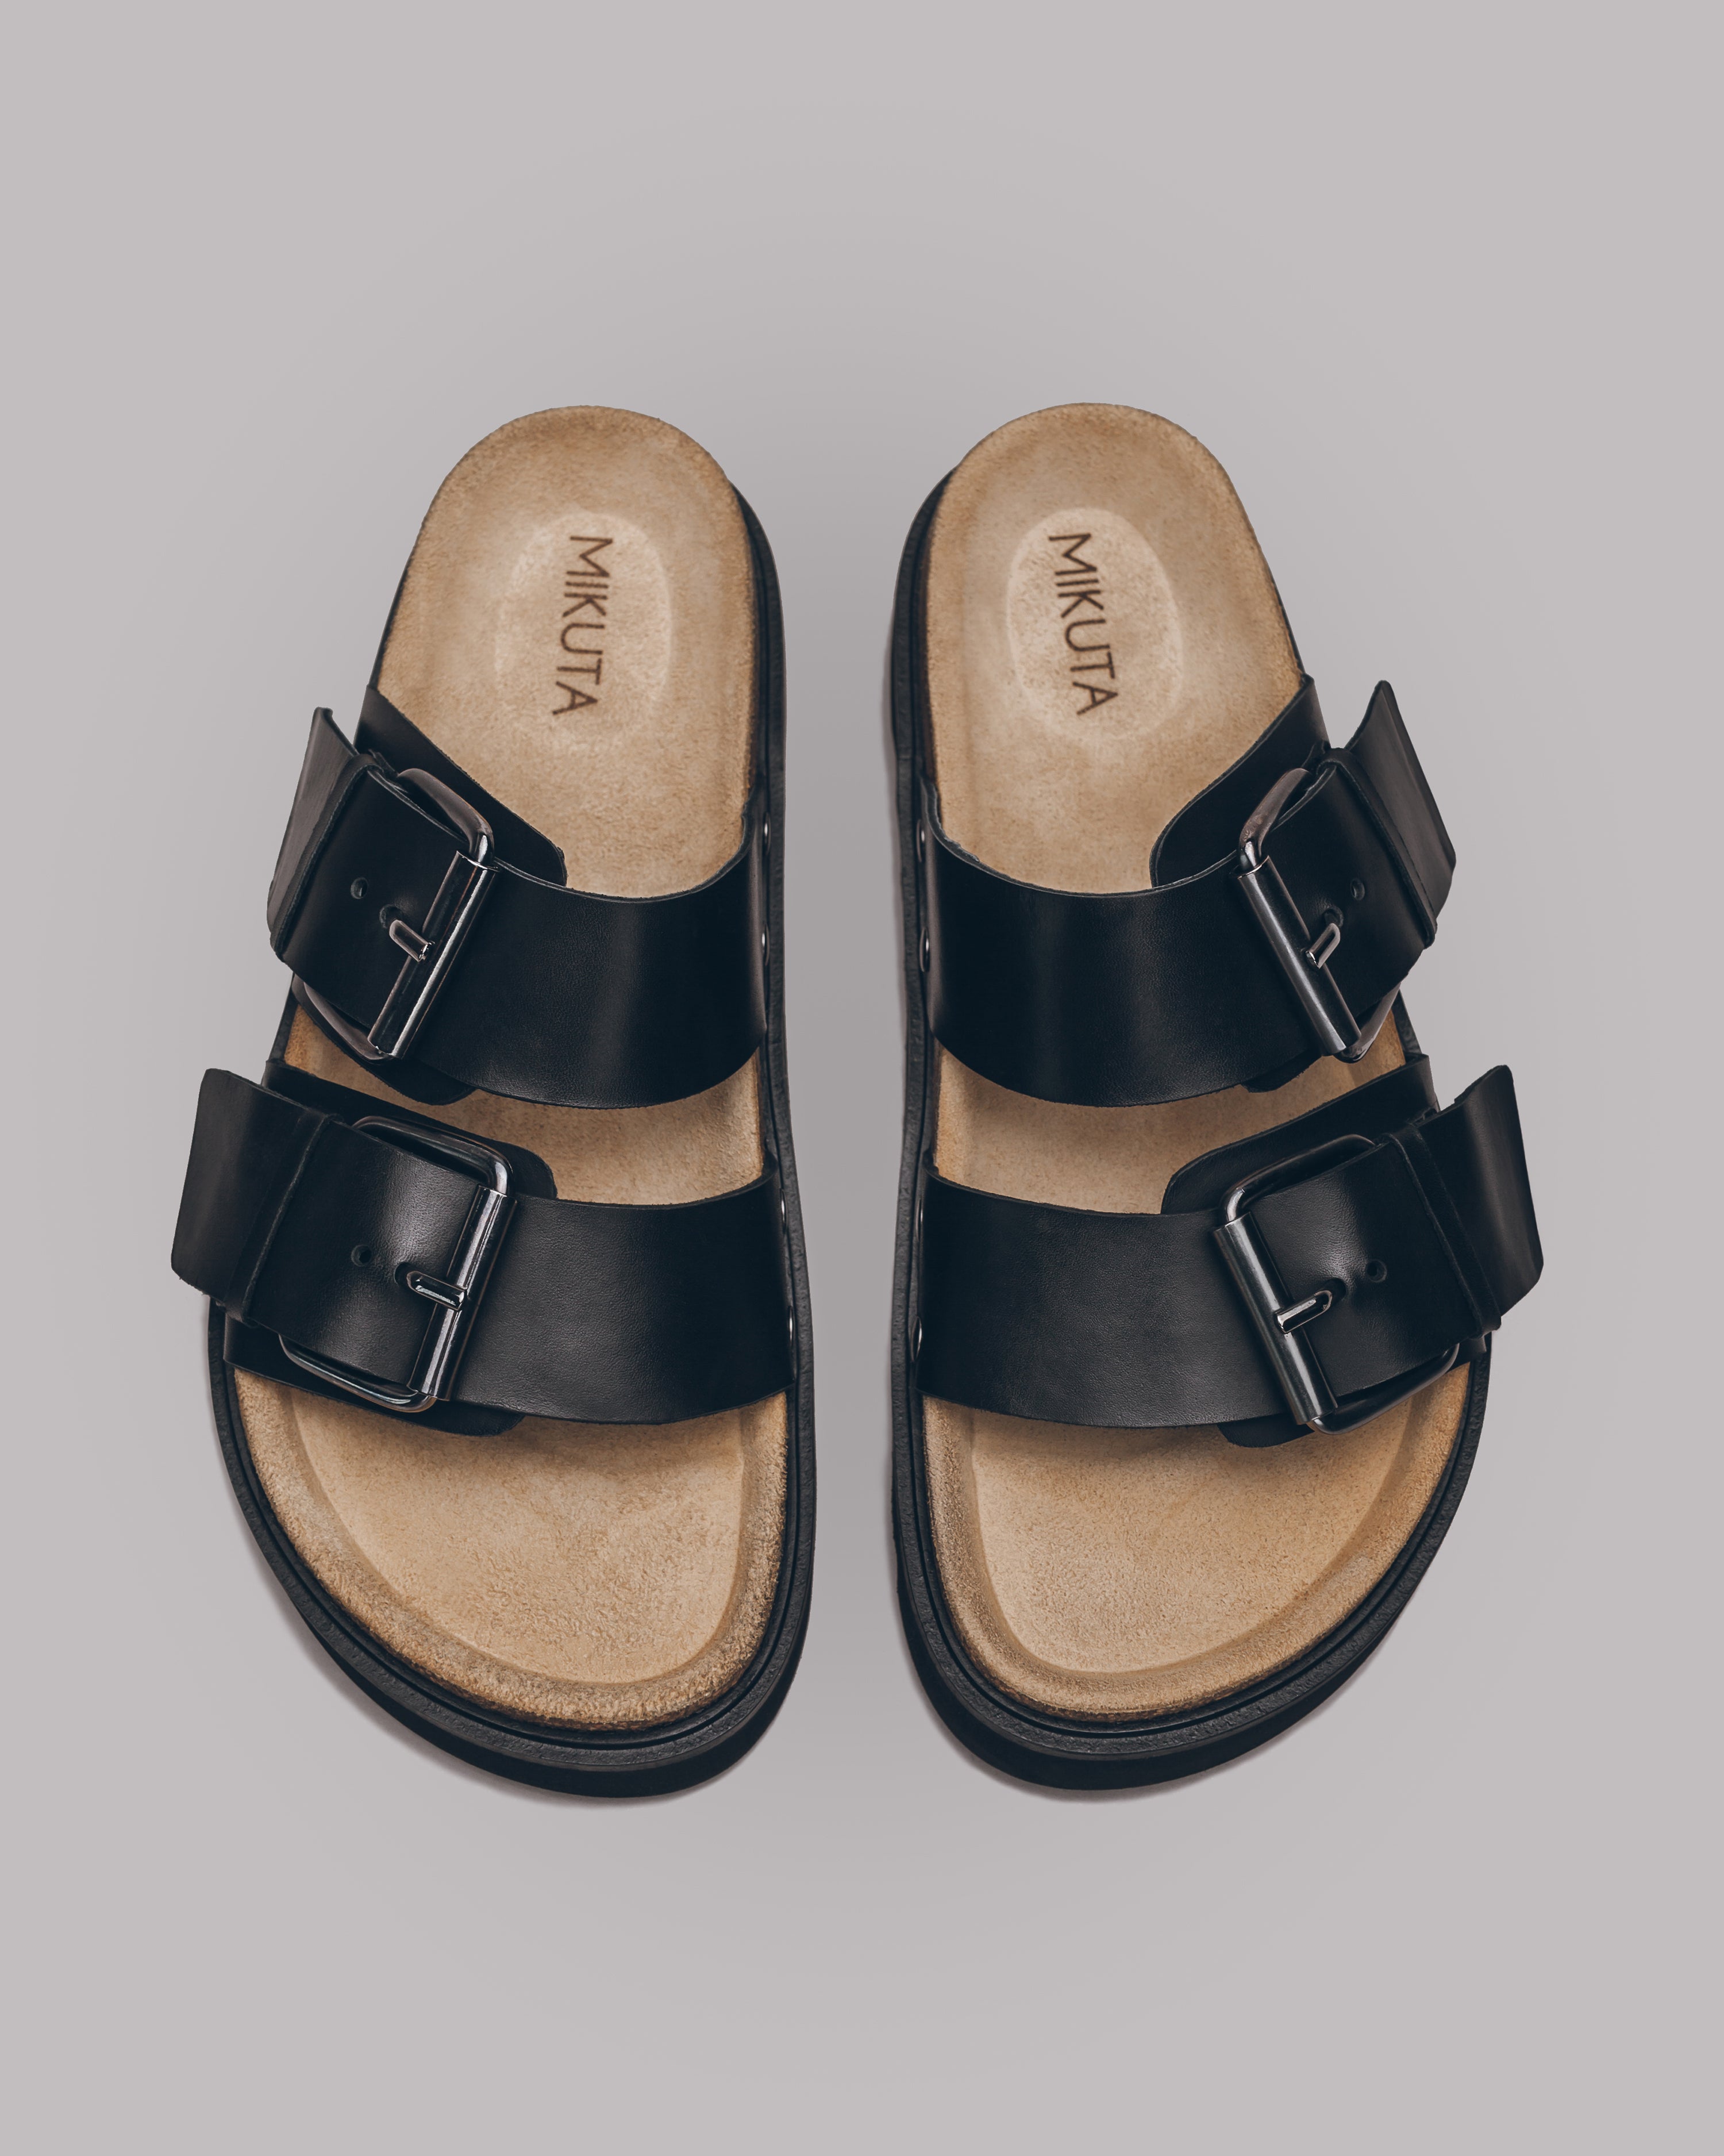 The Black Leather Buckle Sandals